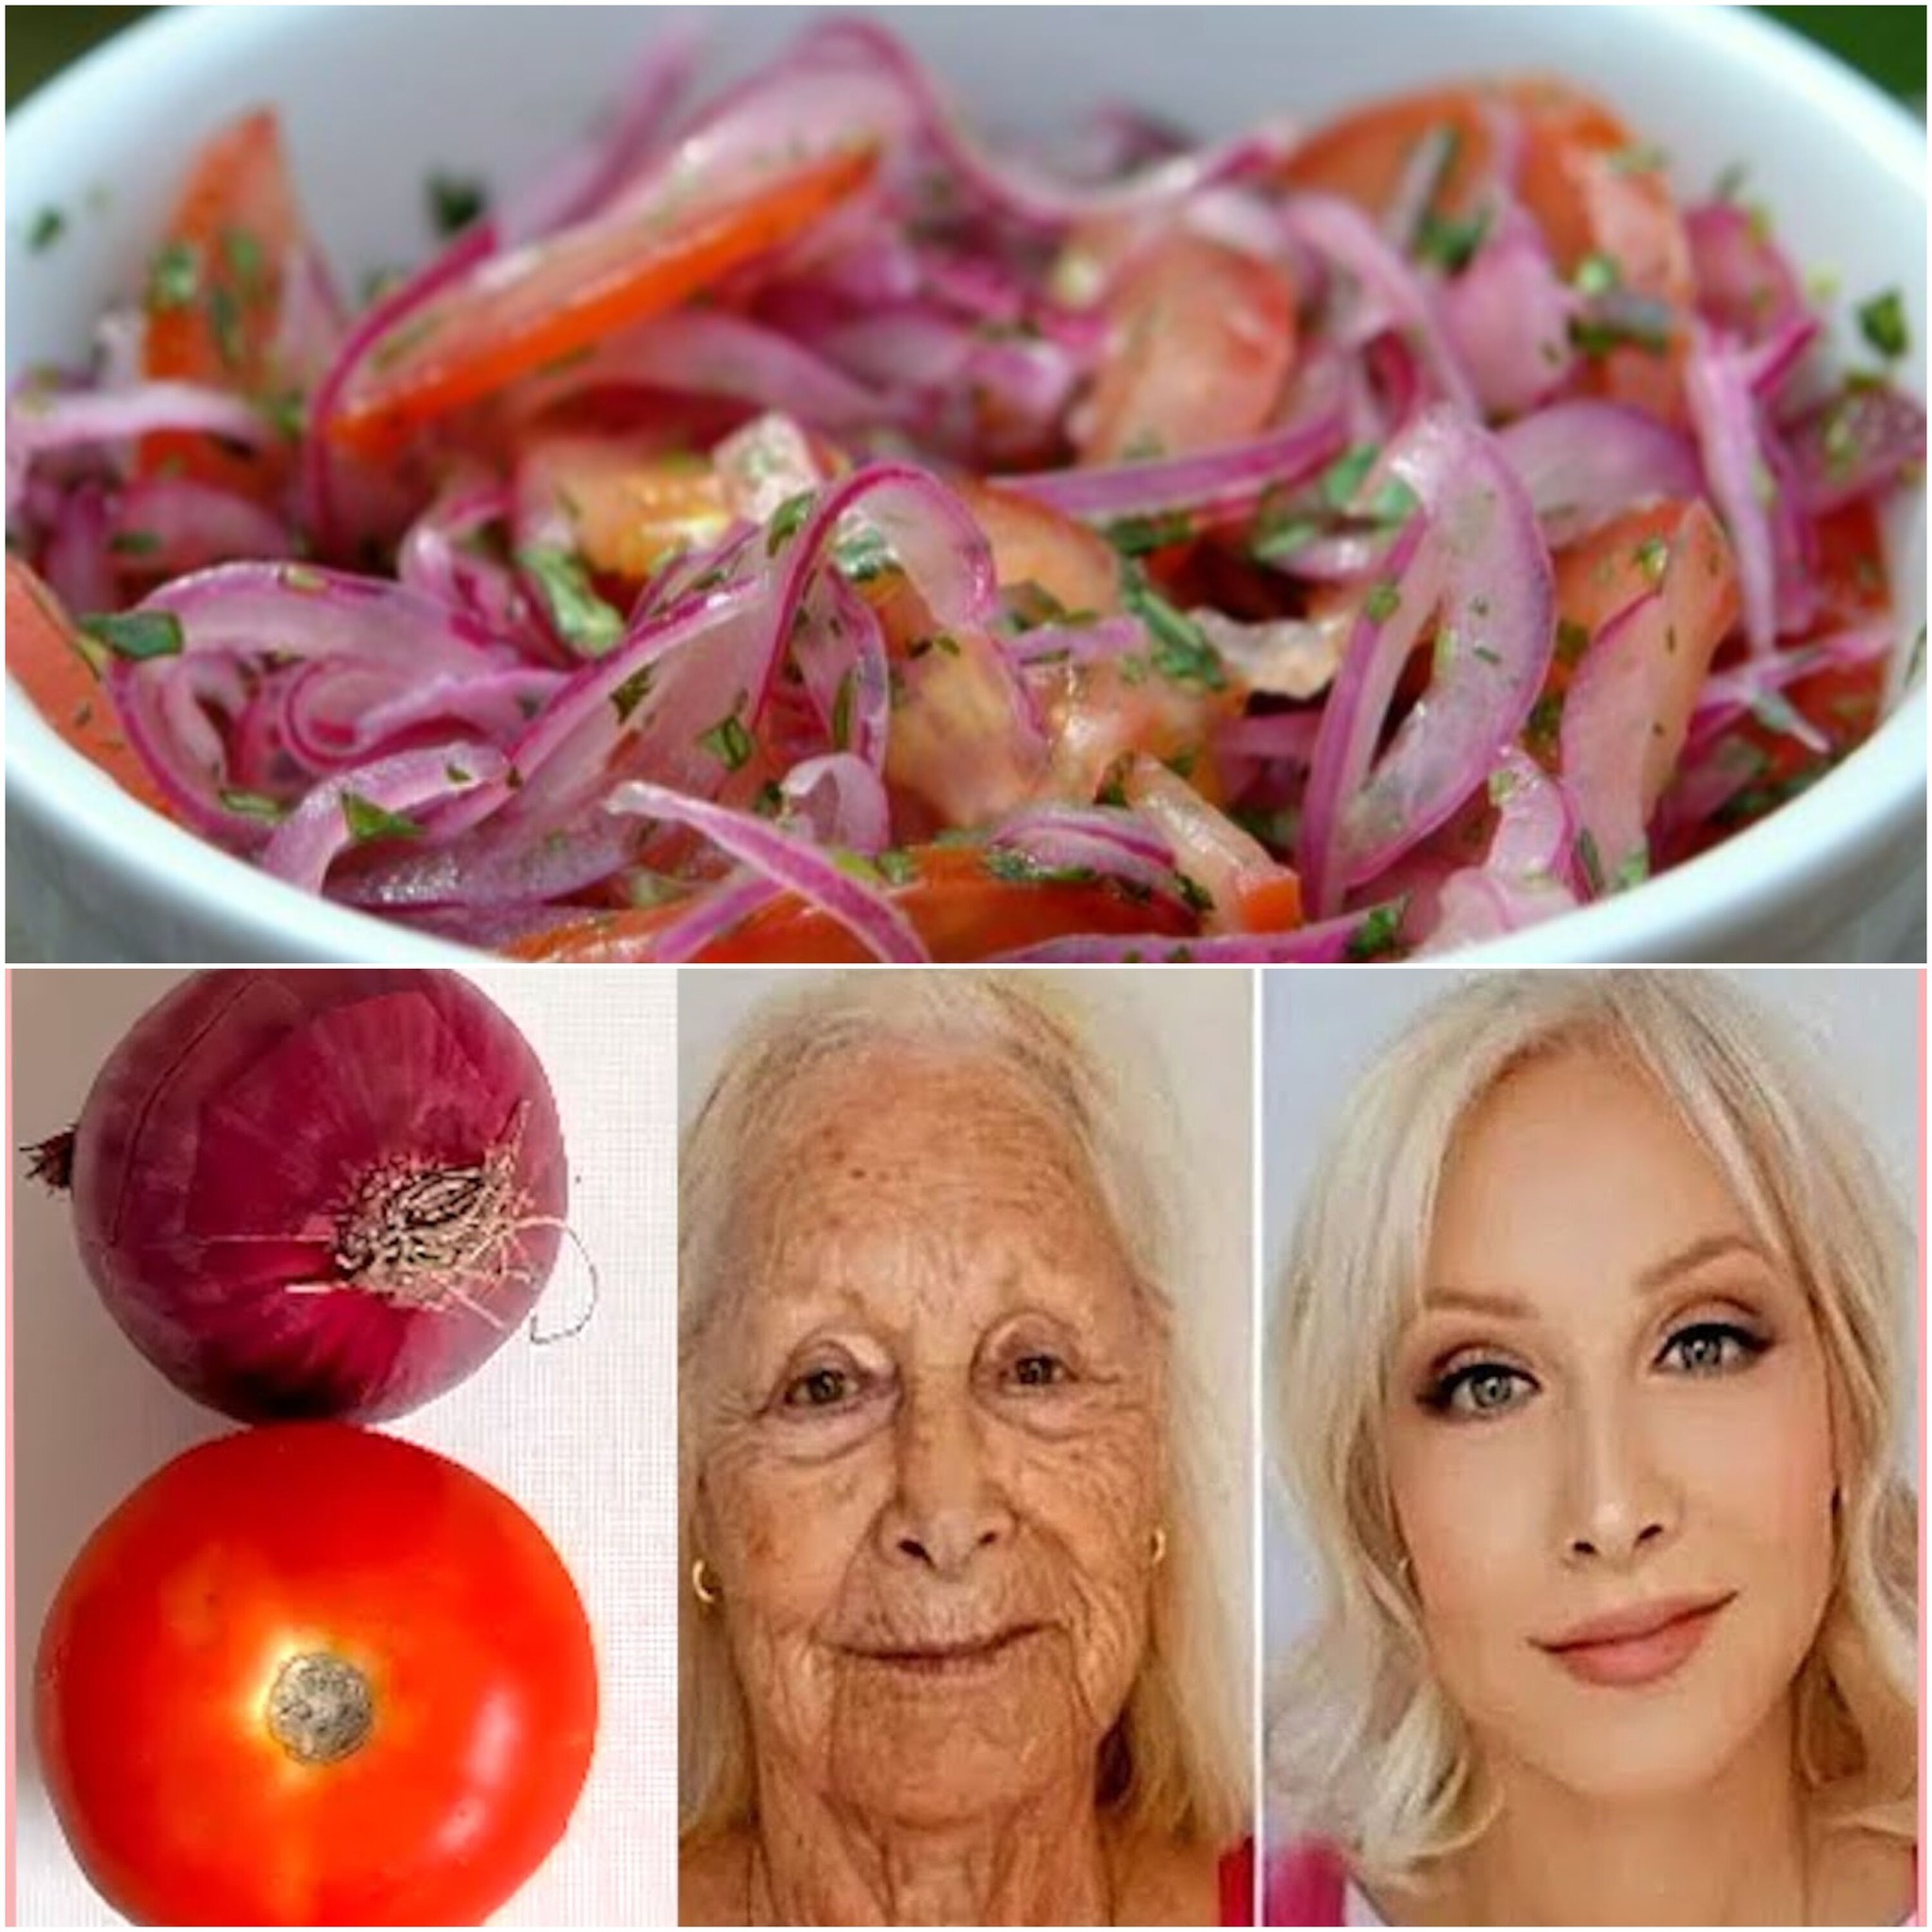 Red Onion and Tomato for Youthful Skin